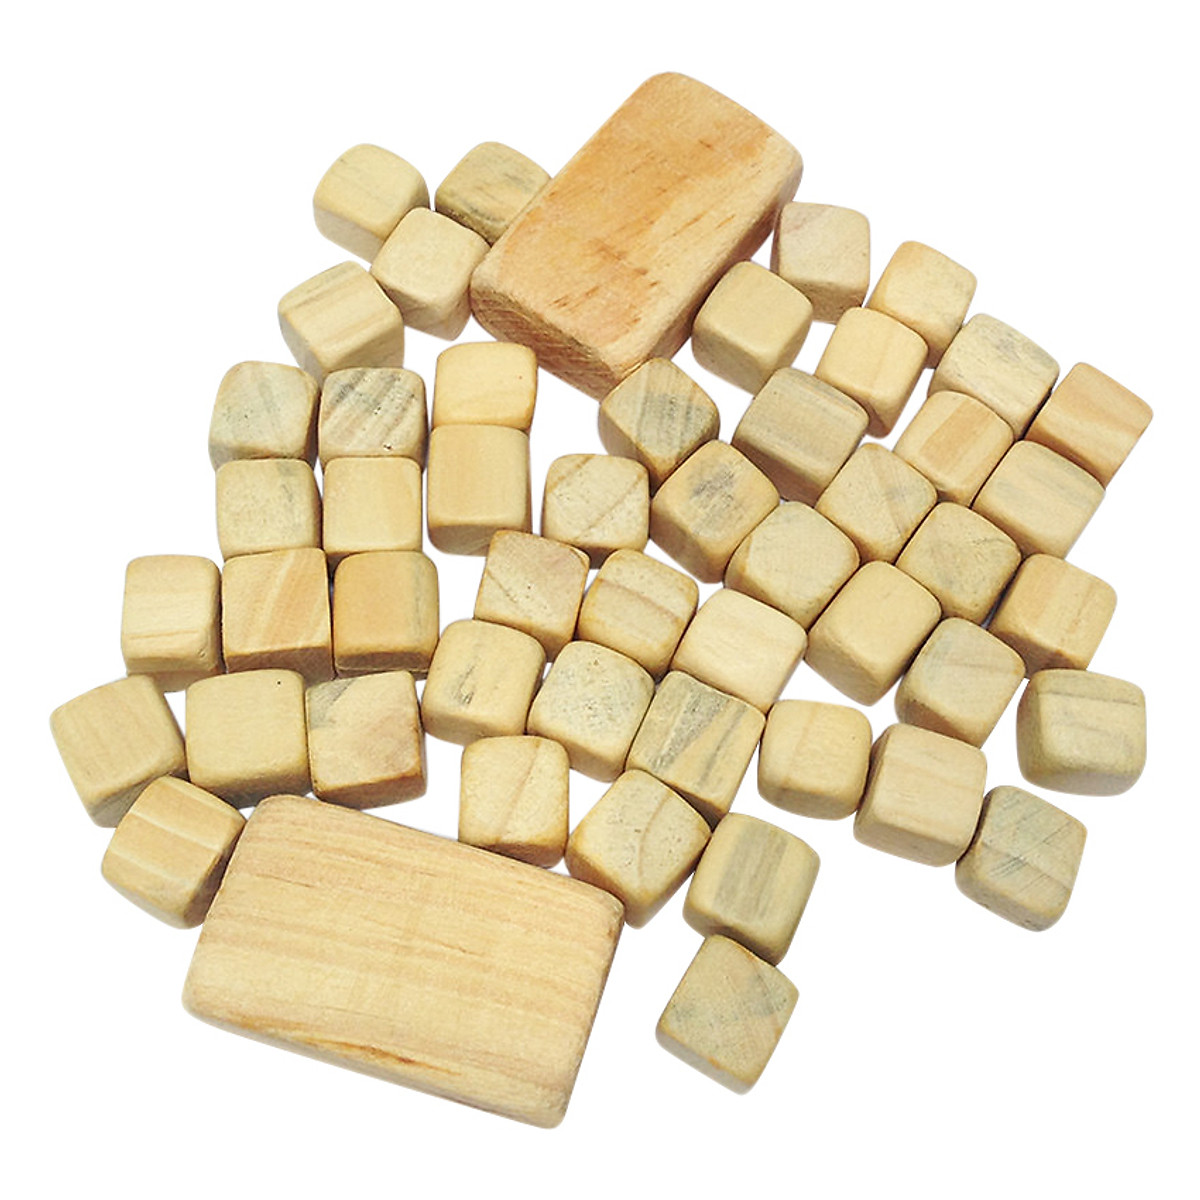 Kids folk board game chess pieces set natural wood building board